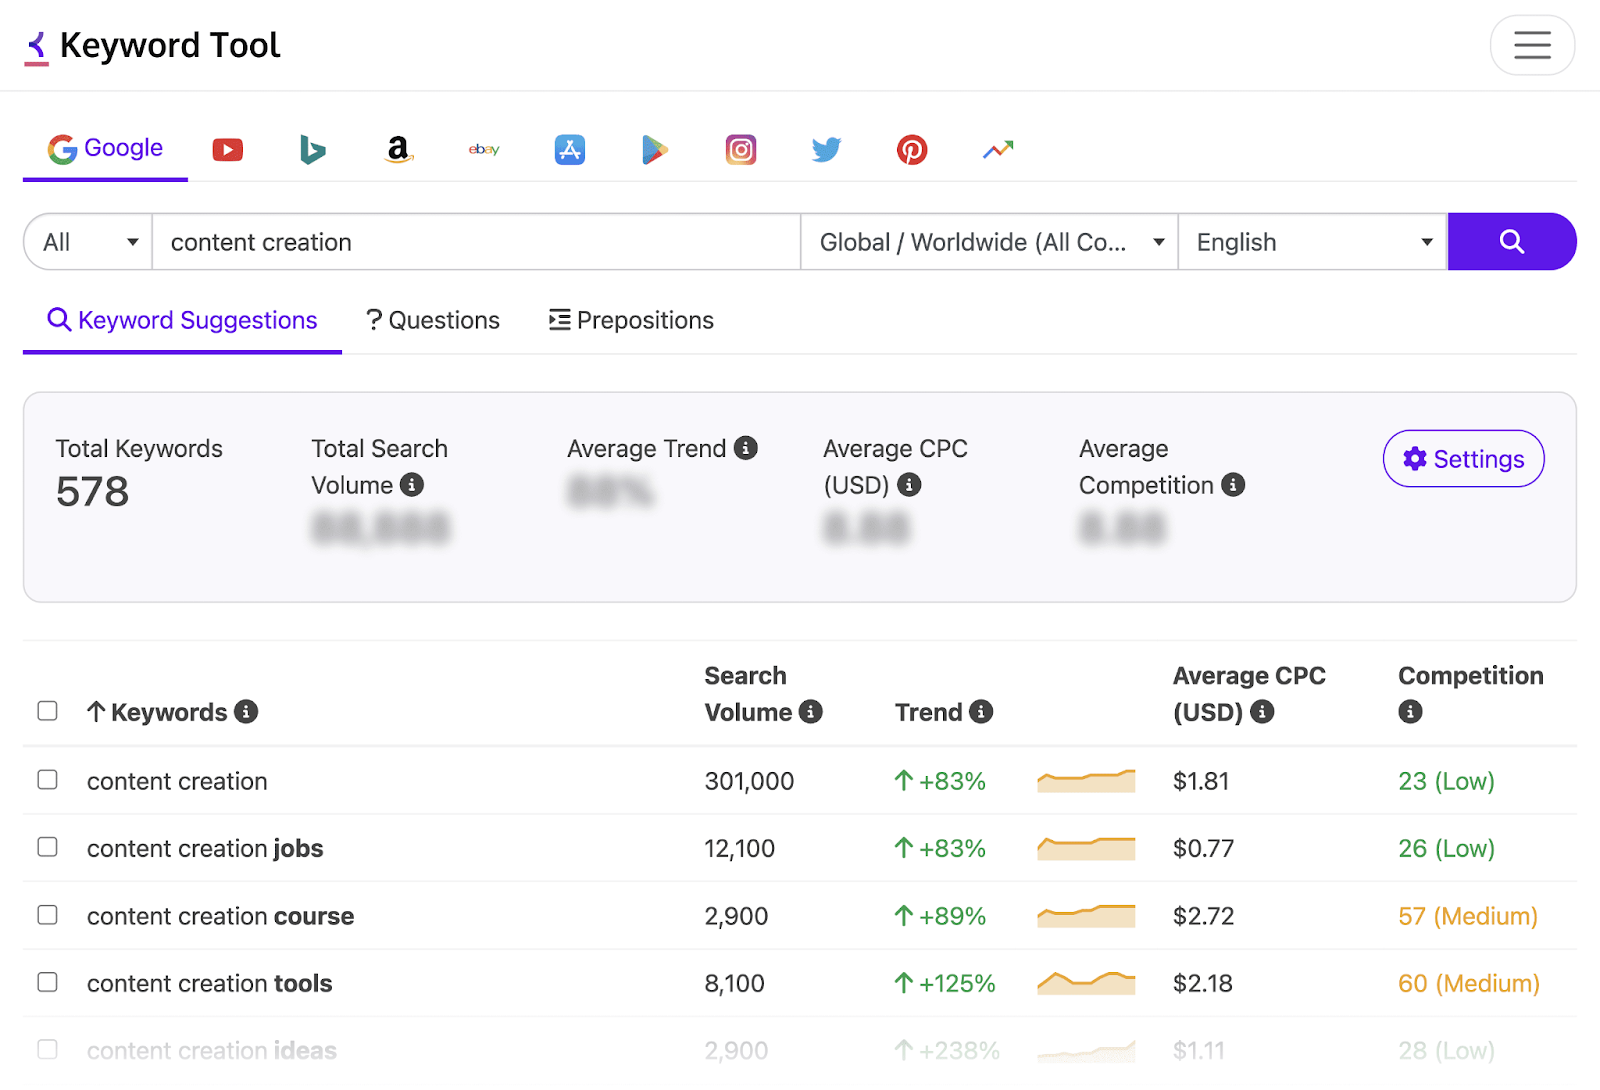 Keyword Tool results overview